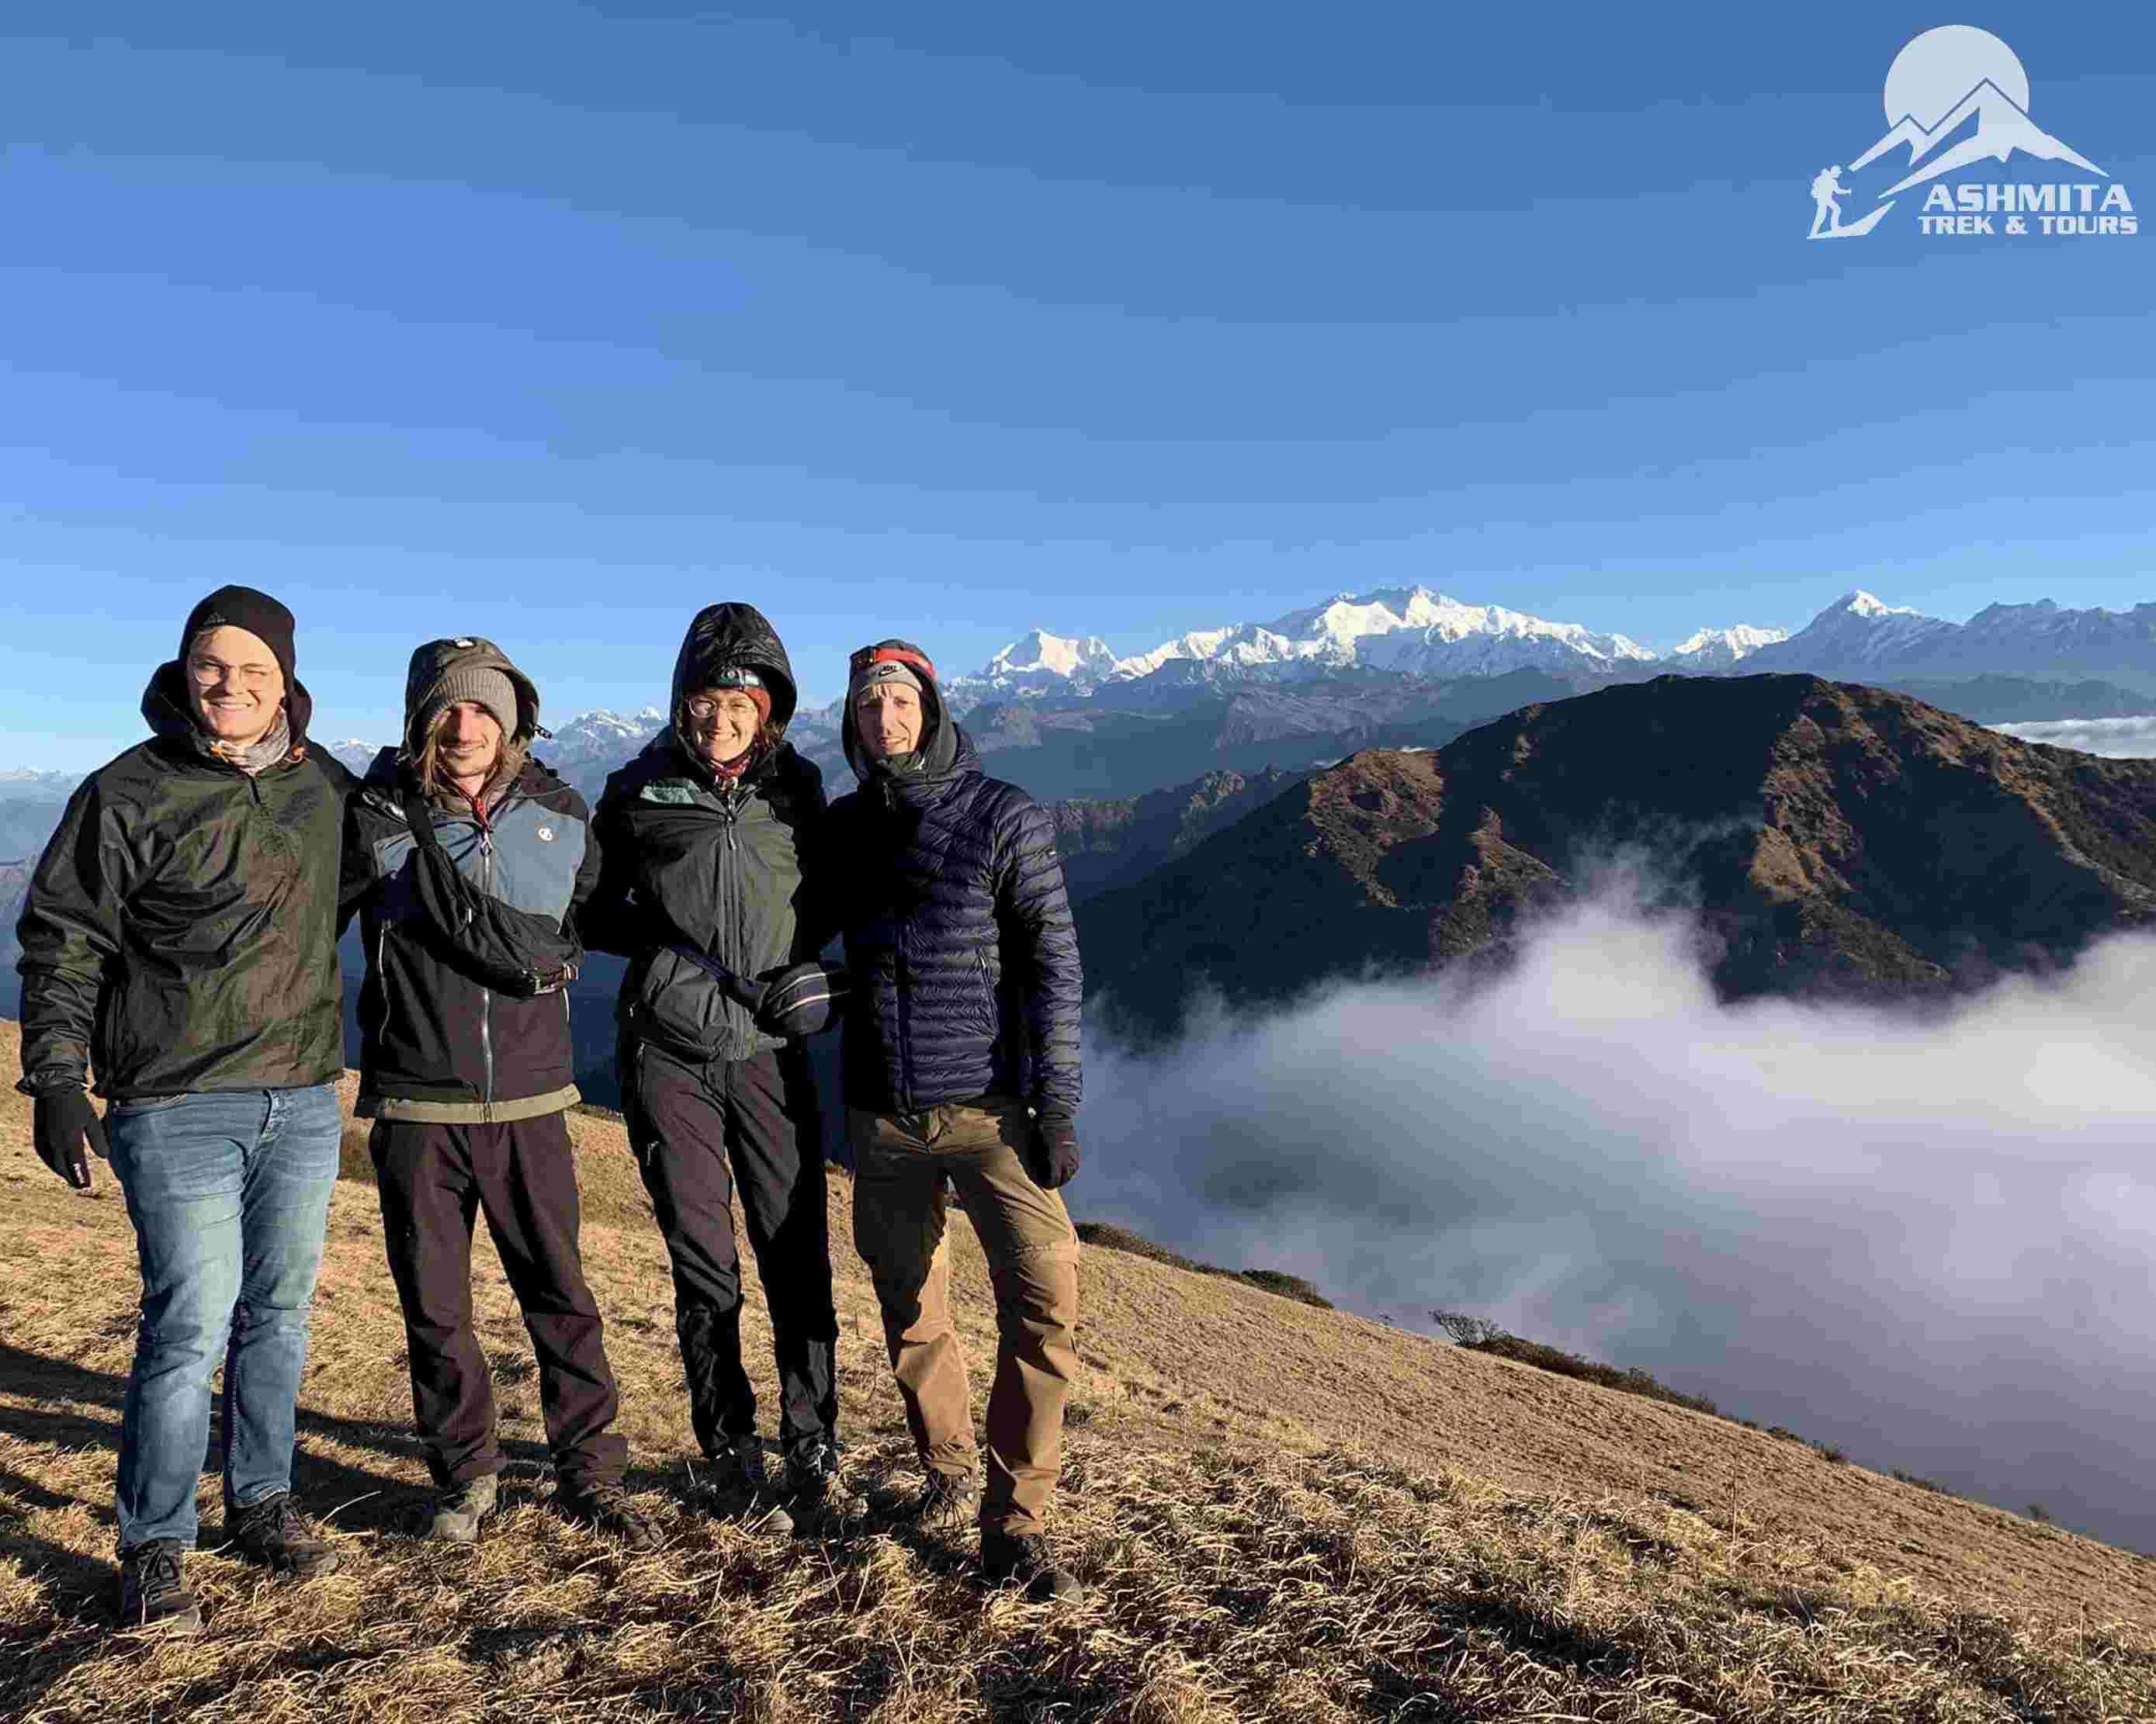 Phalut view point with the majestic view of Mt kanchenjunga and its ranges